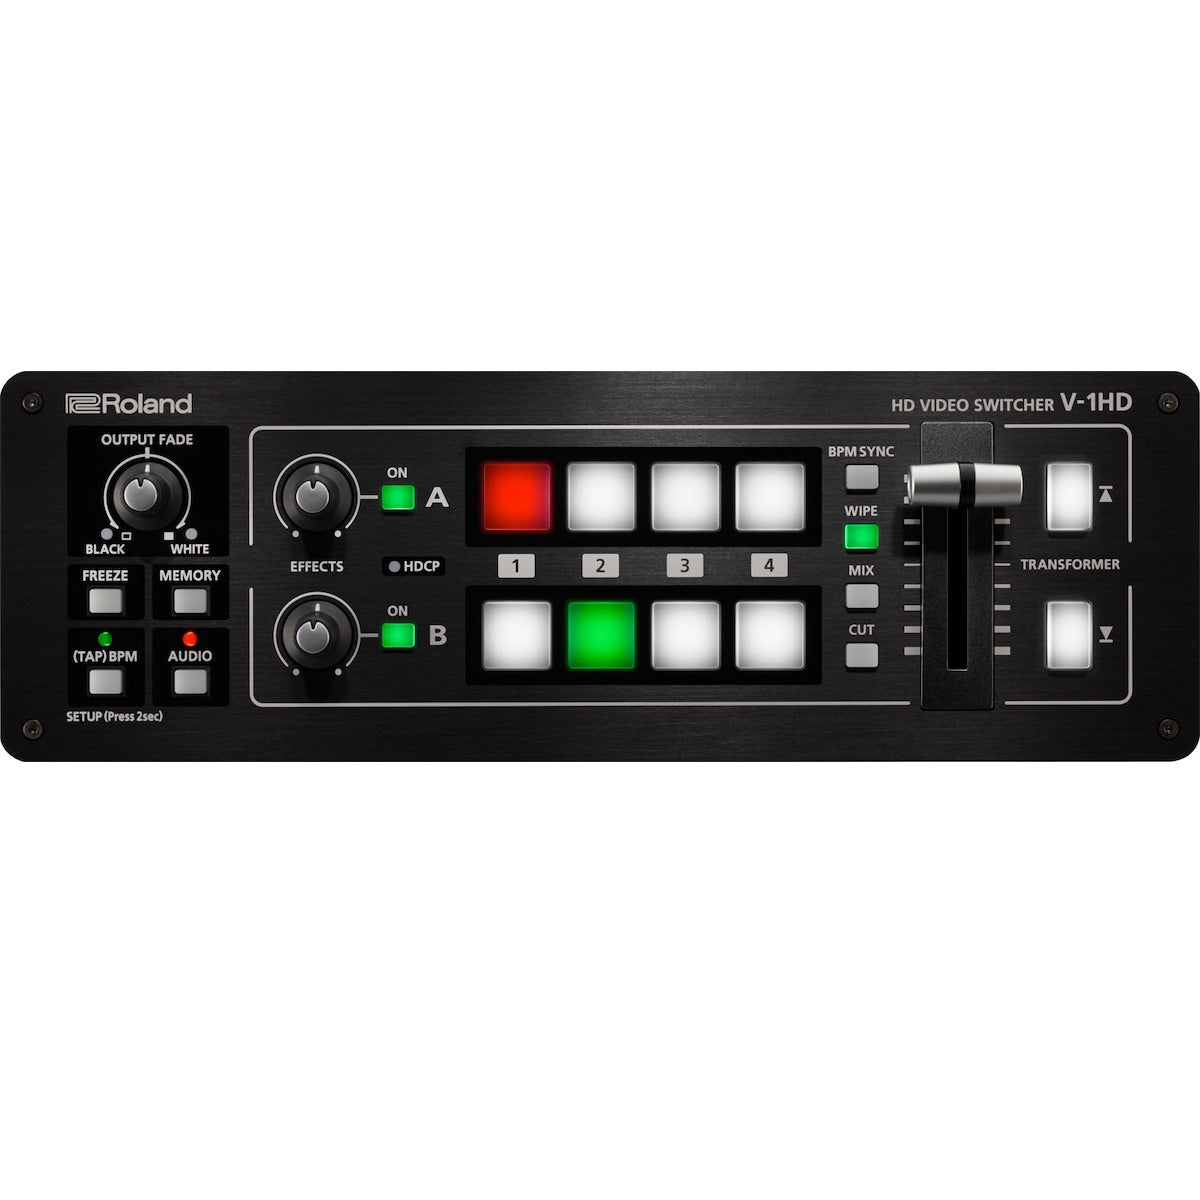 Roland V-1HD - HD Video Switcher with 4 HDMI Inputs, top